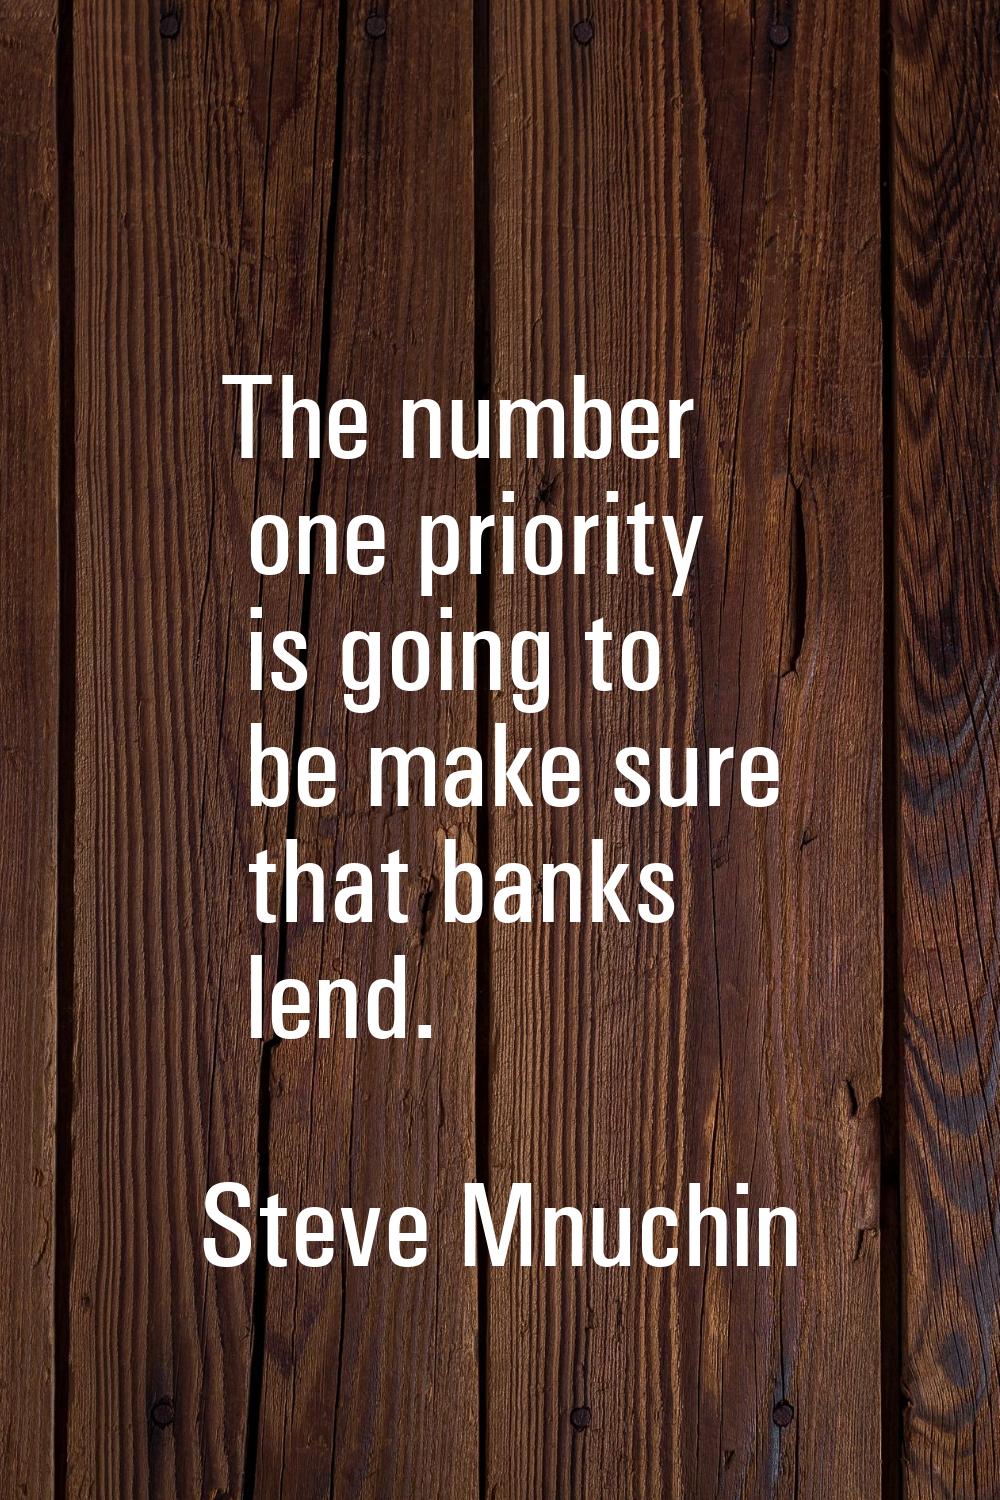 The number one priority is going to be make sure that banks lend.